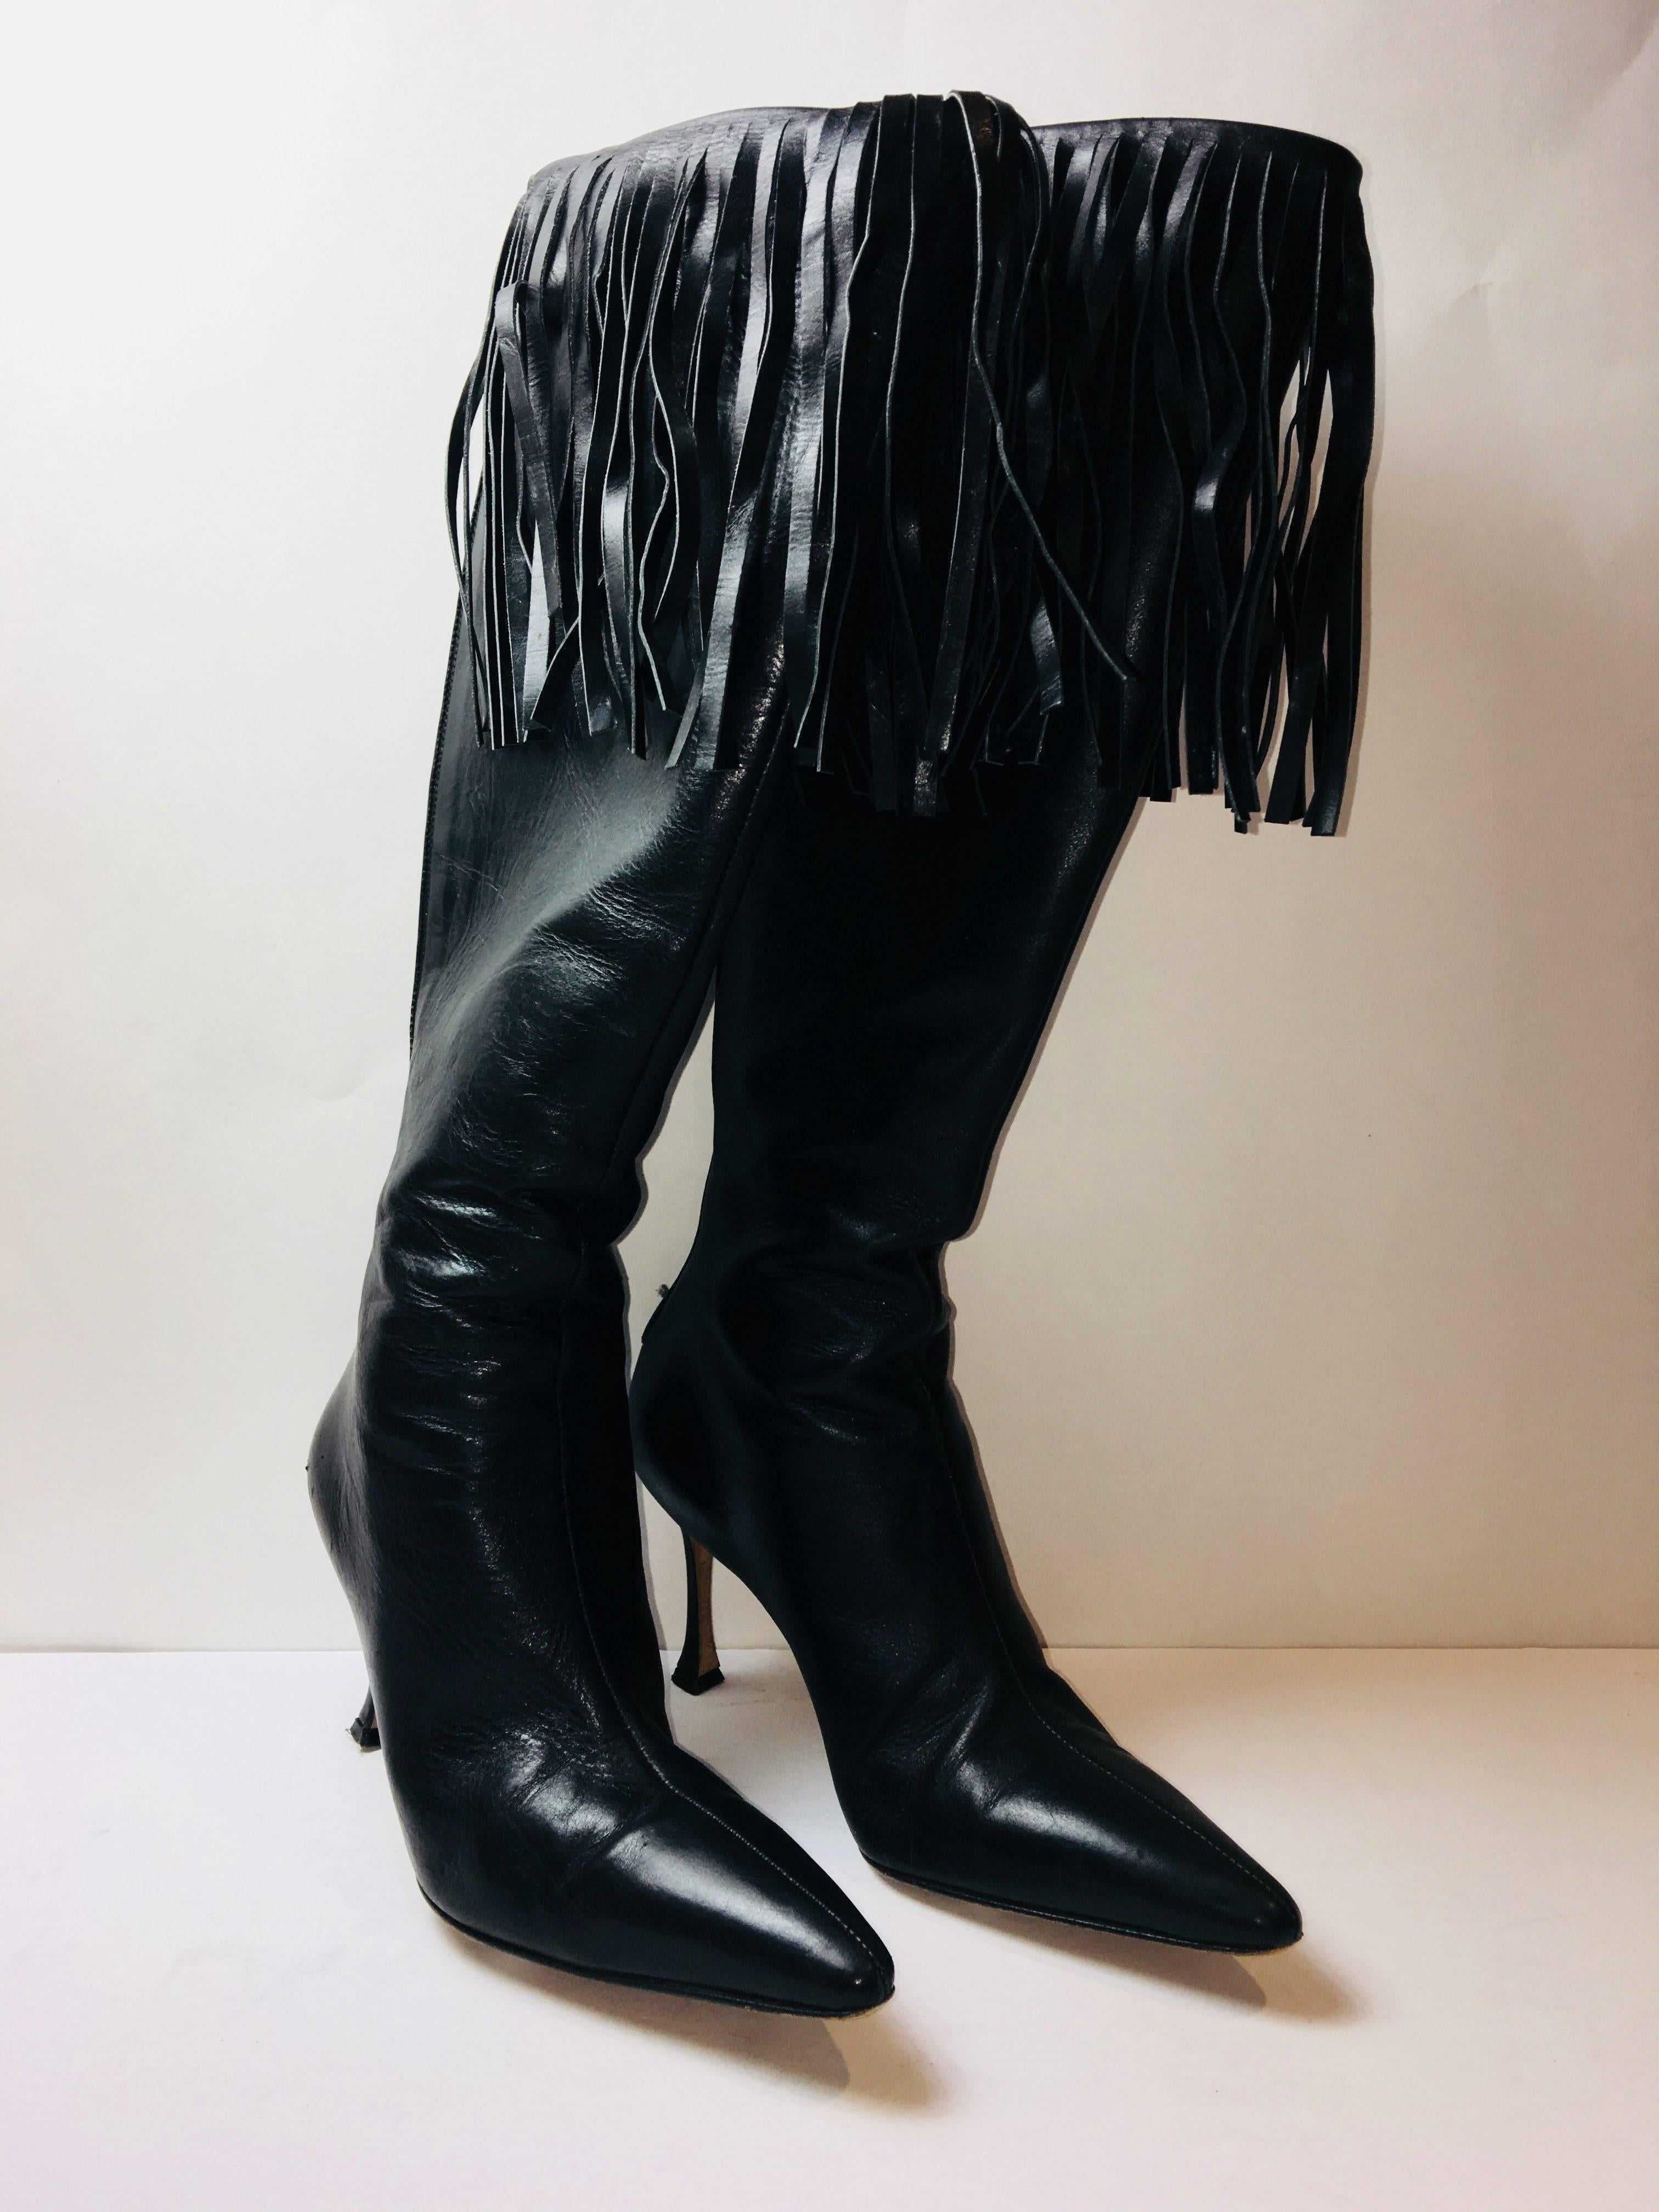 Manolo Blahnik Knee-High Tassel Boots with Pointed Toe.